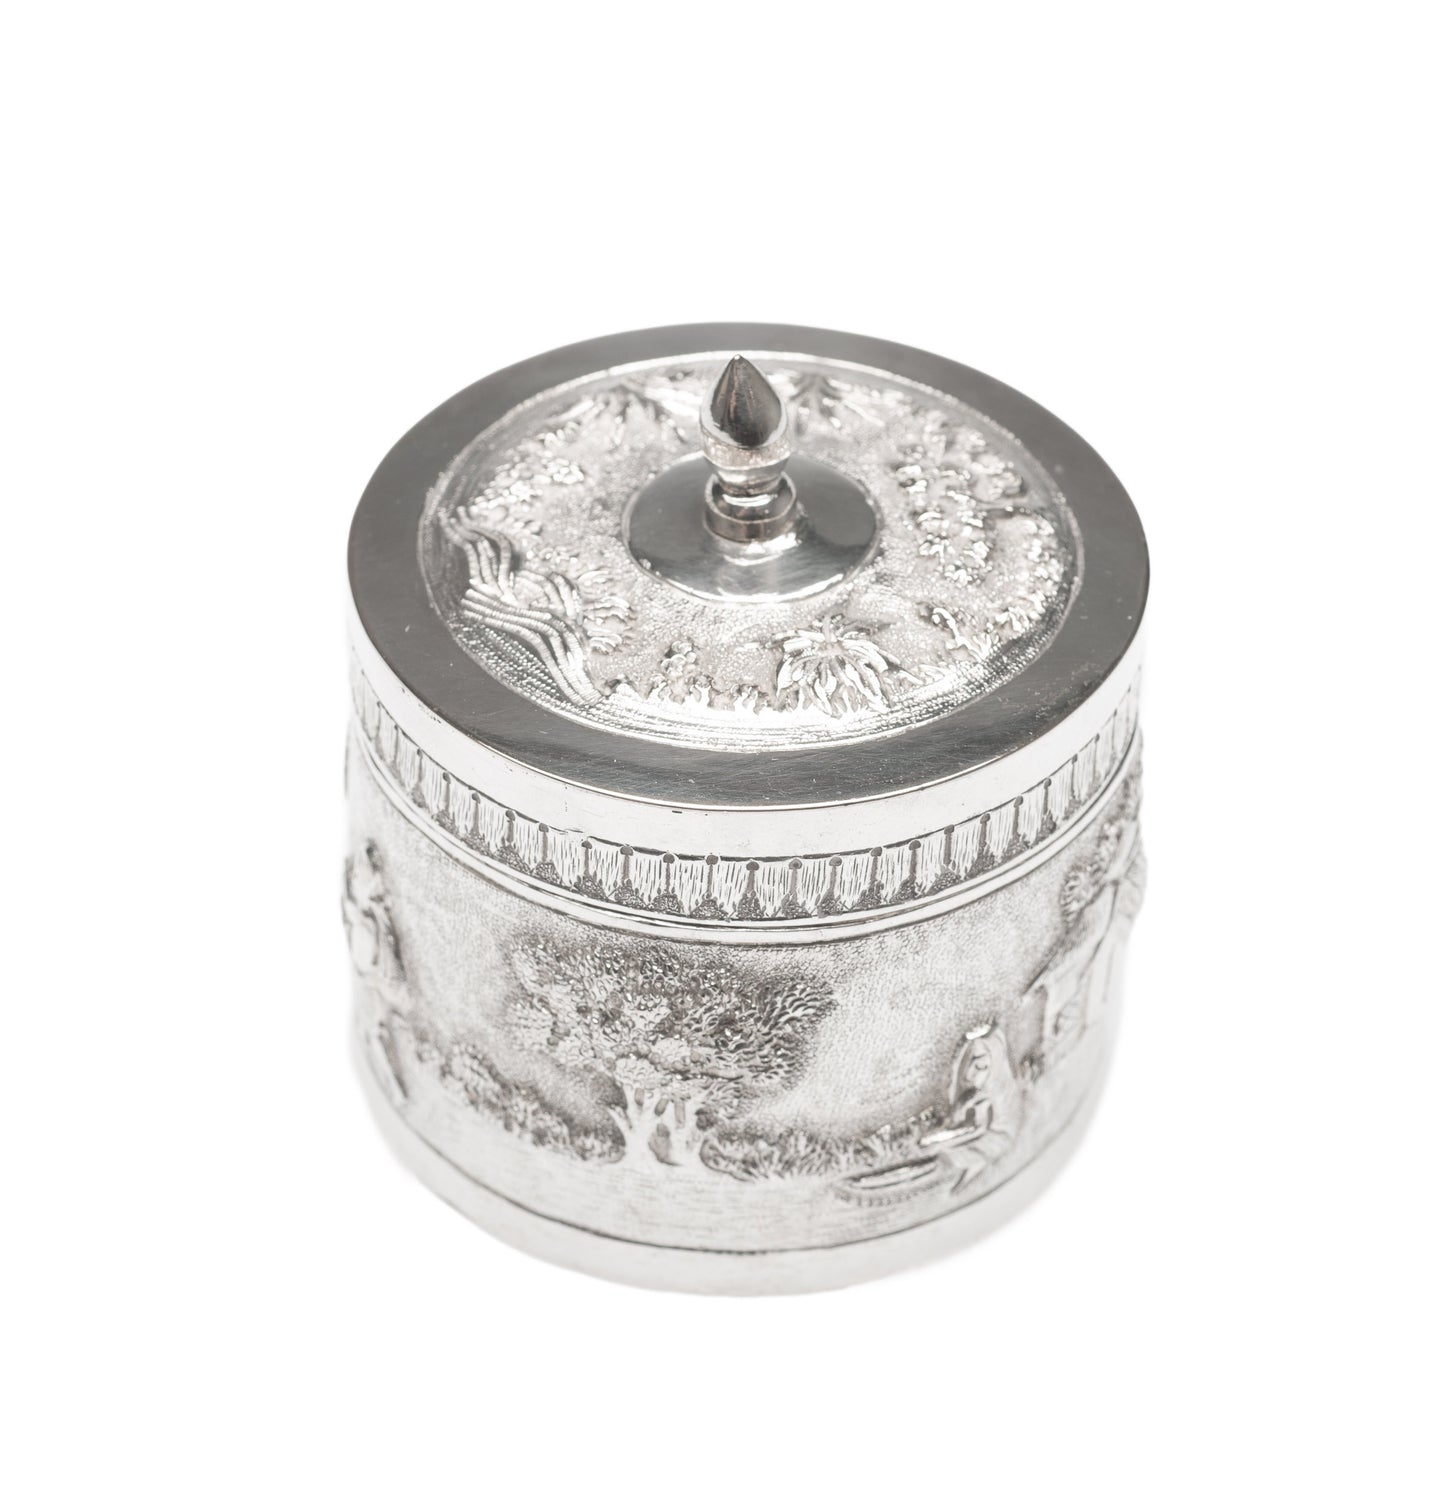 Vintage Indian Silver Plate Small Lidded Round Repousse Box with Pastoral Scenes (Code 1643)